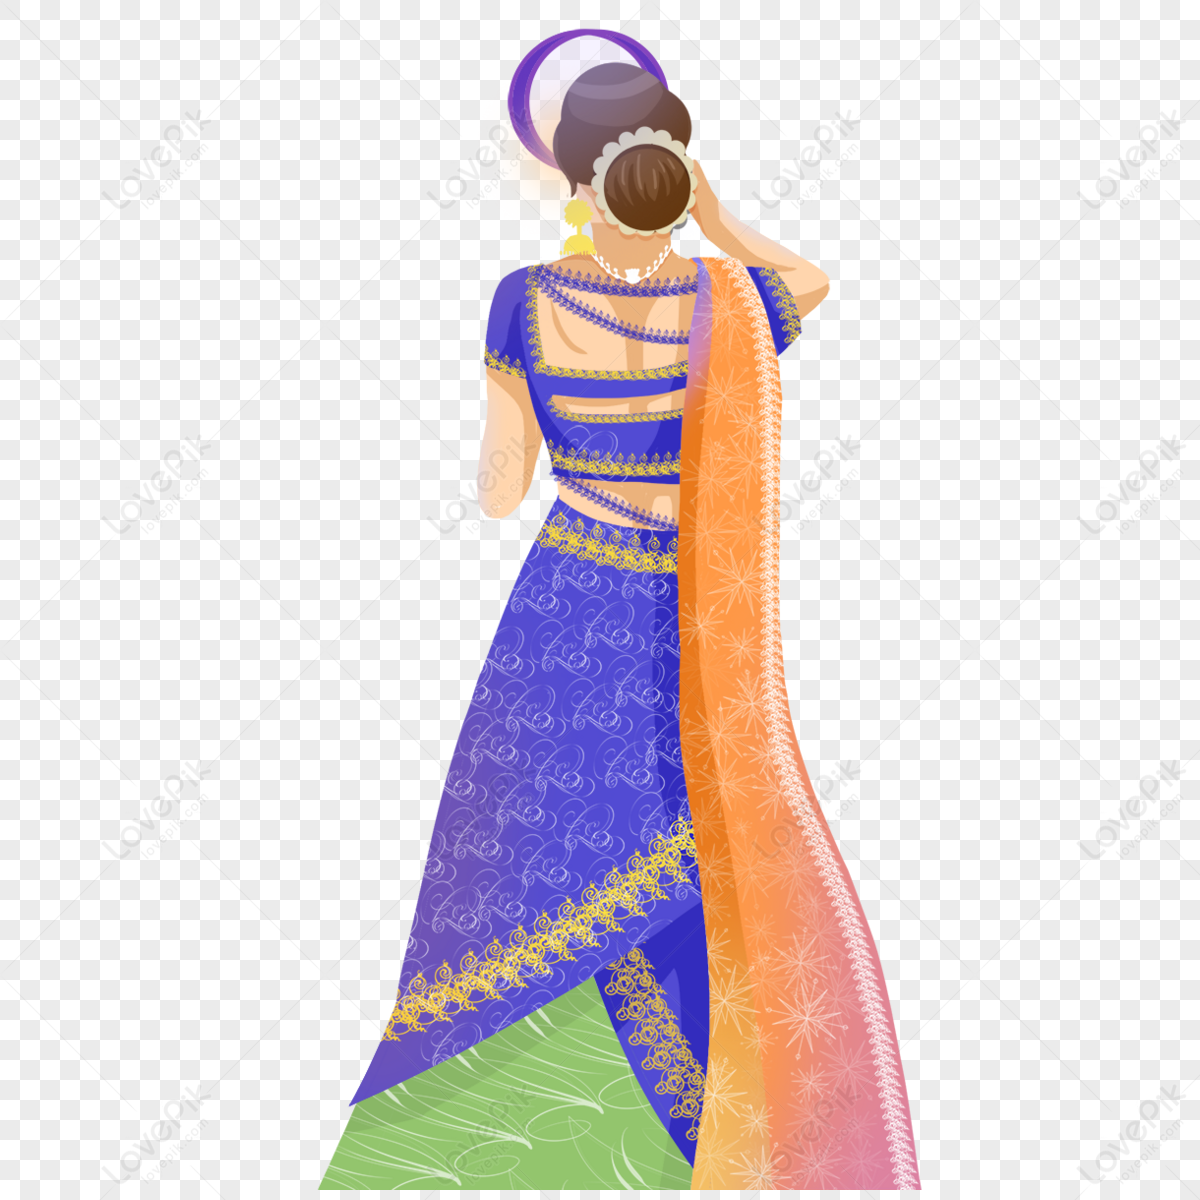 South Asia Beautiful Woman And Man Wearing Indian Traditional Cloth,  Hinduism Costume, Sari On White Background Outline Royalty Free SVG,  Cliparts, Vectors, and Stock Illustration. Image 66399736.